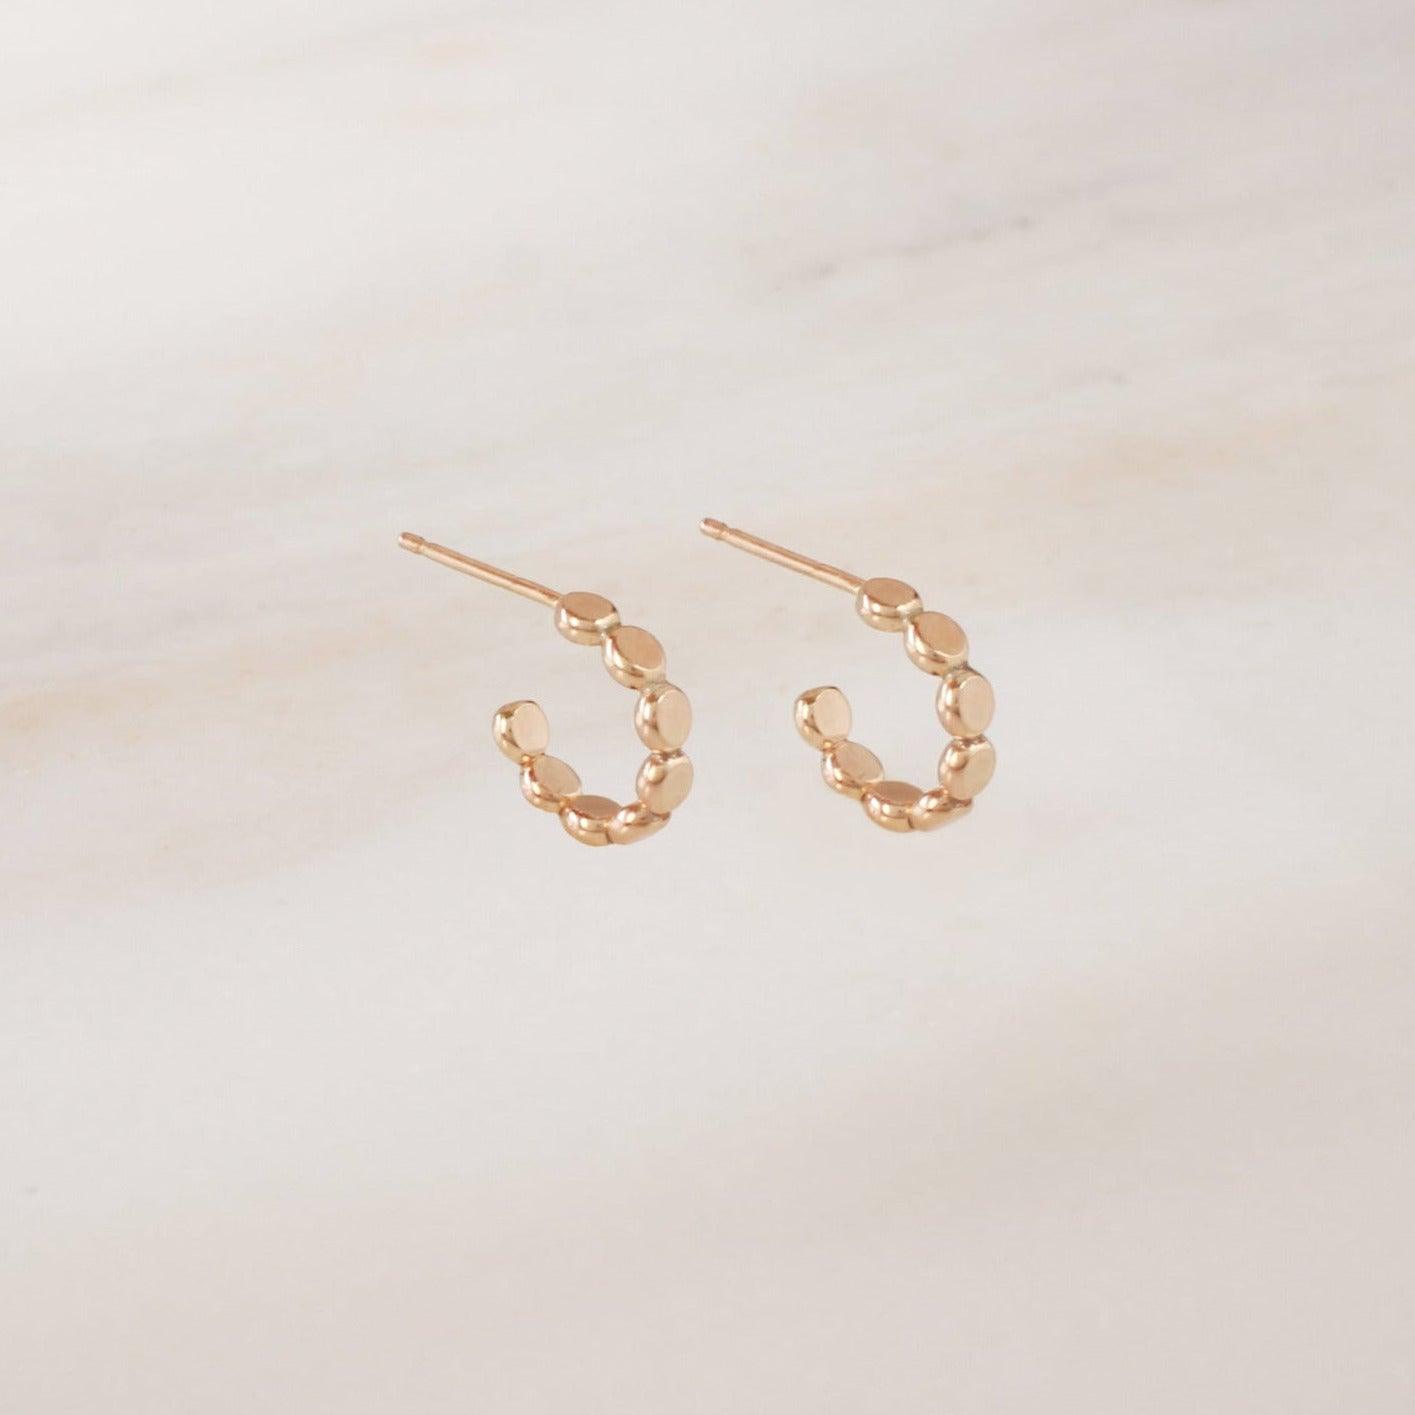 Tiny Cora Hoop Earrings - Nolia Jewelry - Meaningful + Sustainably Handcrafted Jewelry